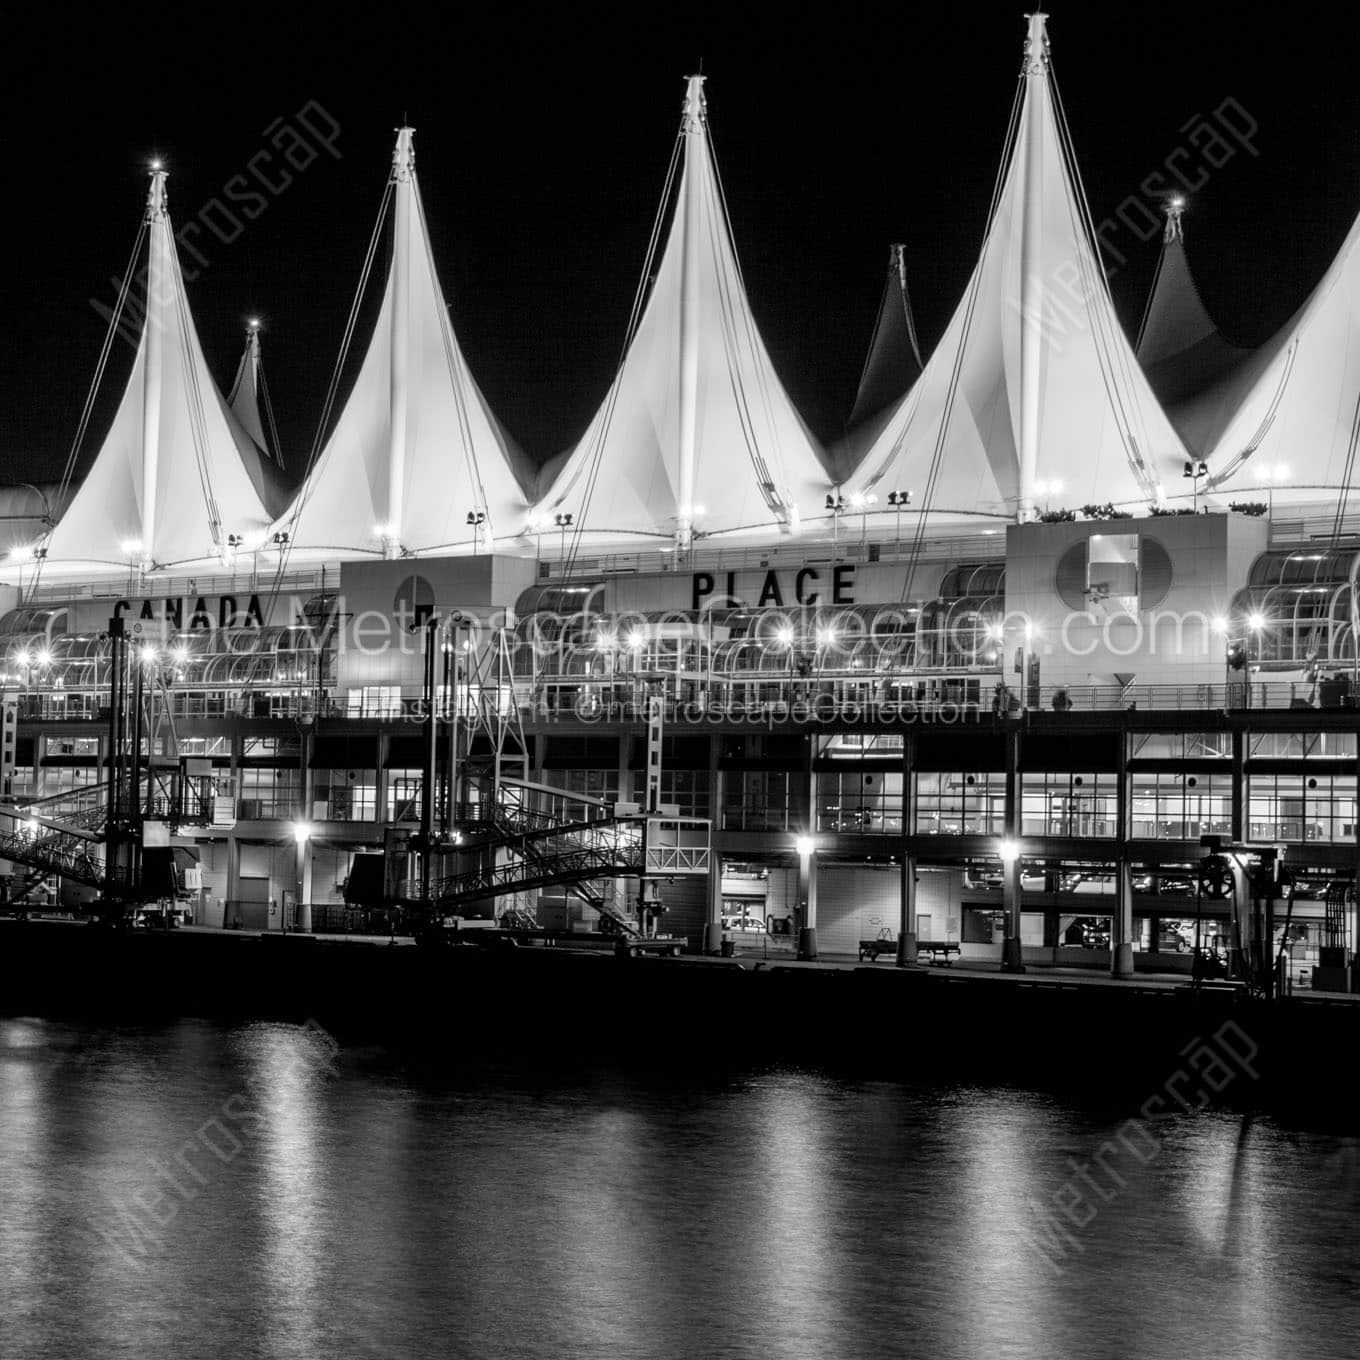 canada place at night Black & White Office Art